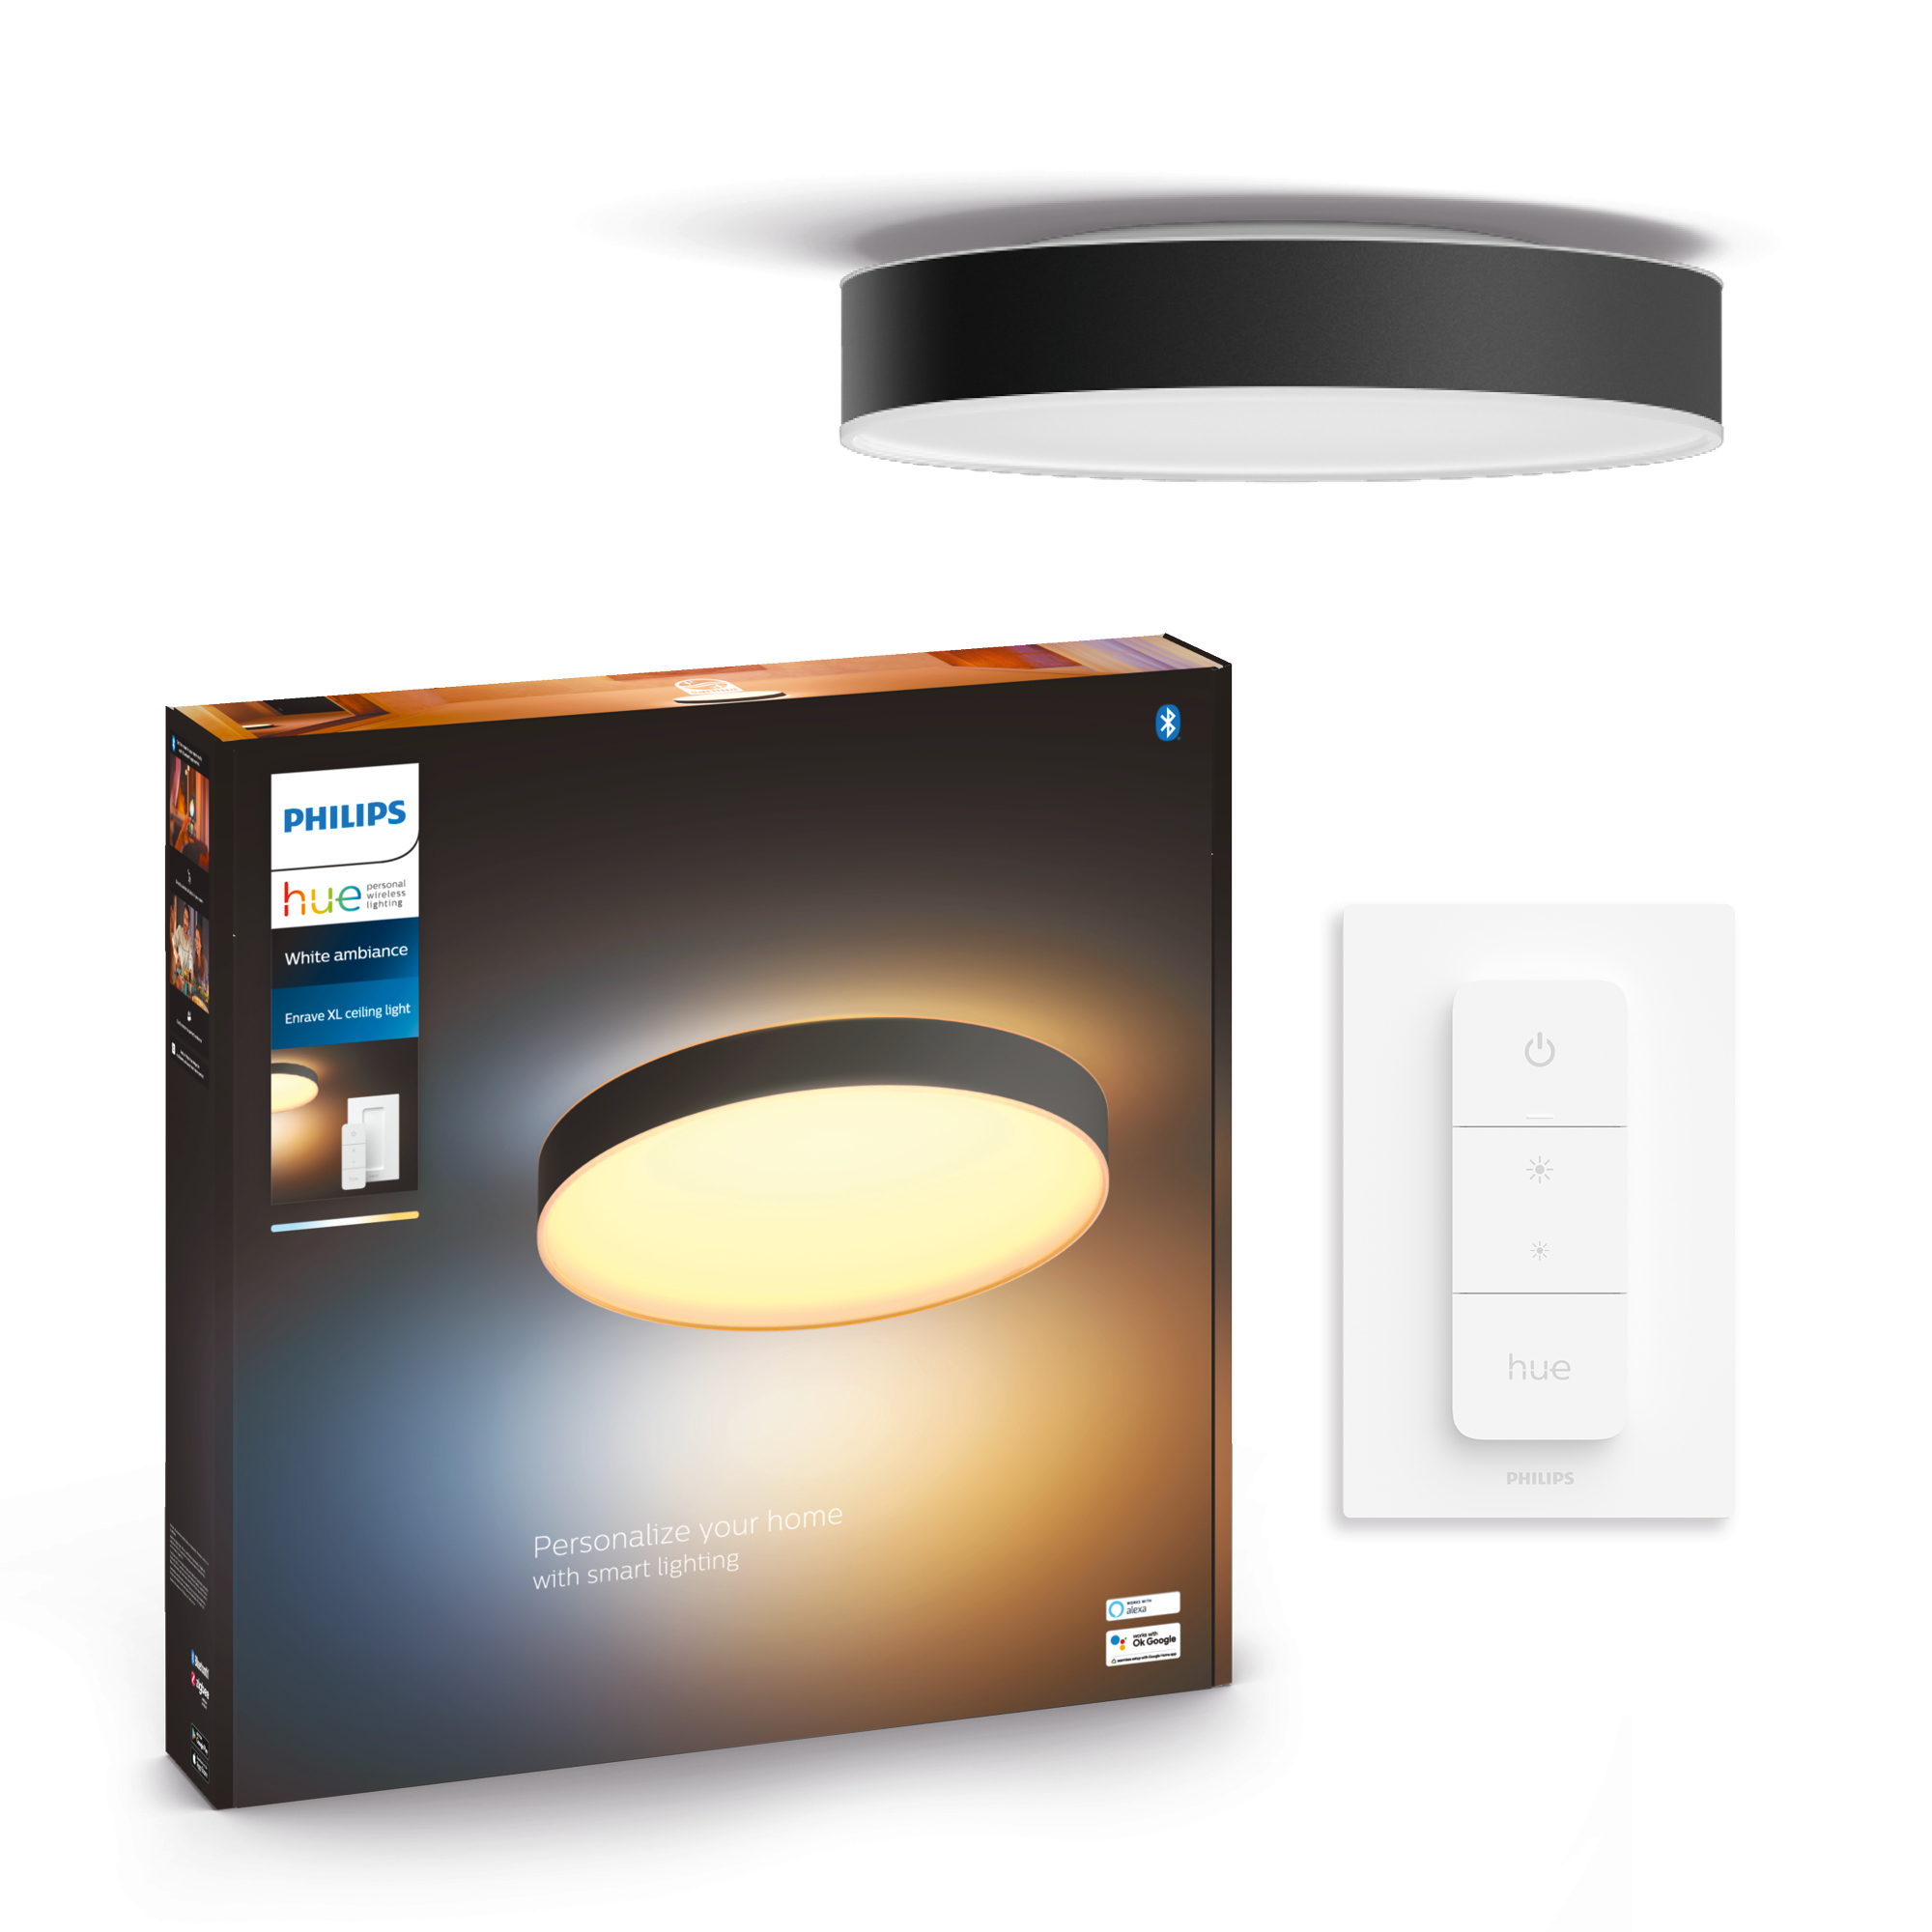 Philips Hue Enrave ceiling light product